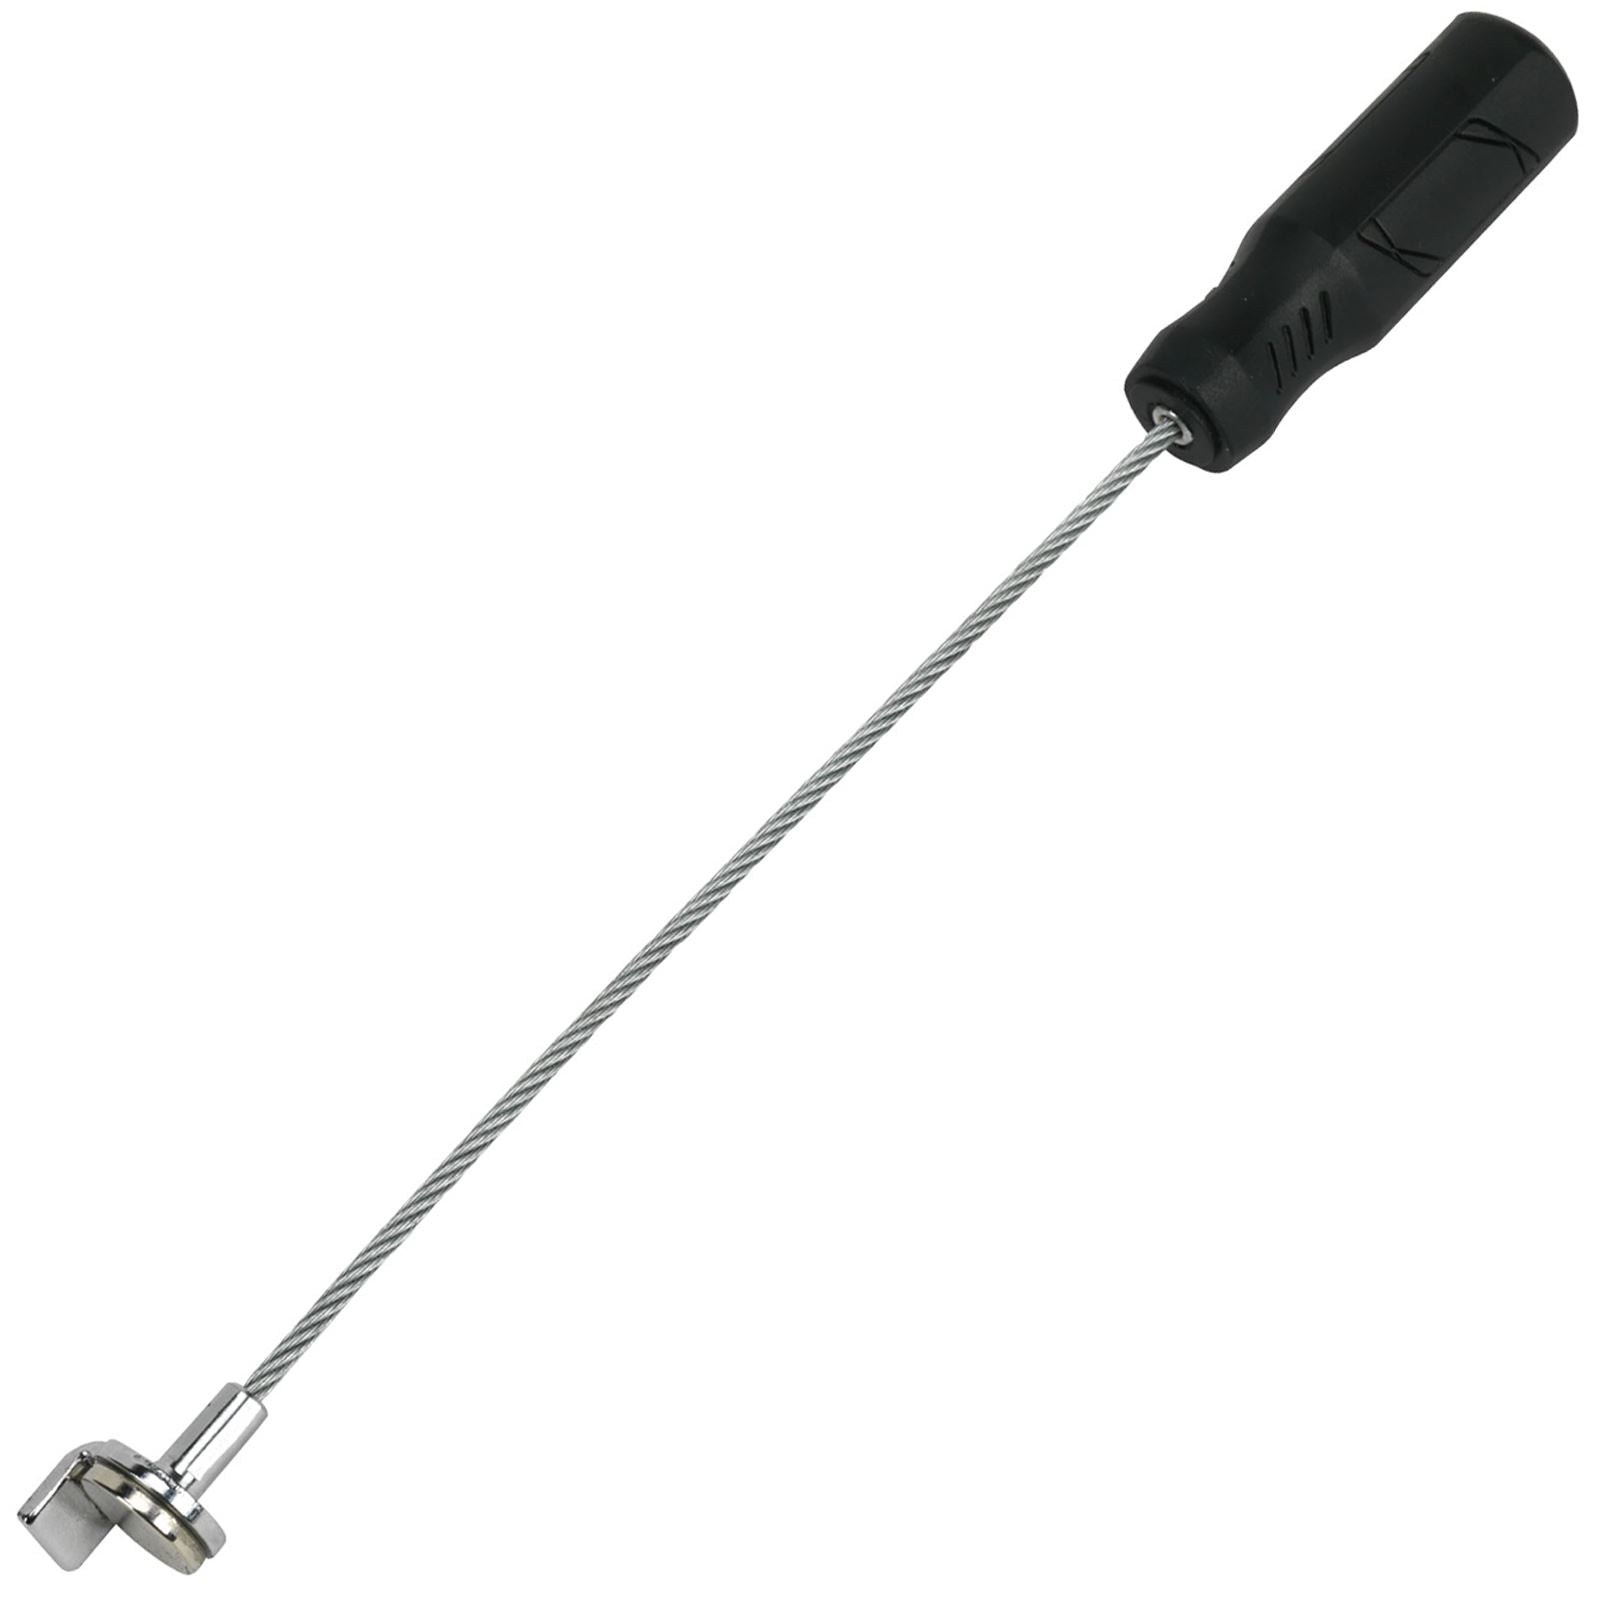 Sealey Oil Change Safety Sump Plug Remover